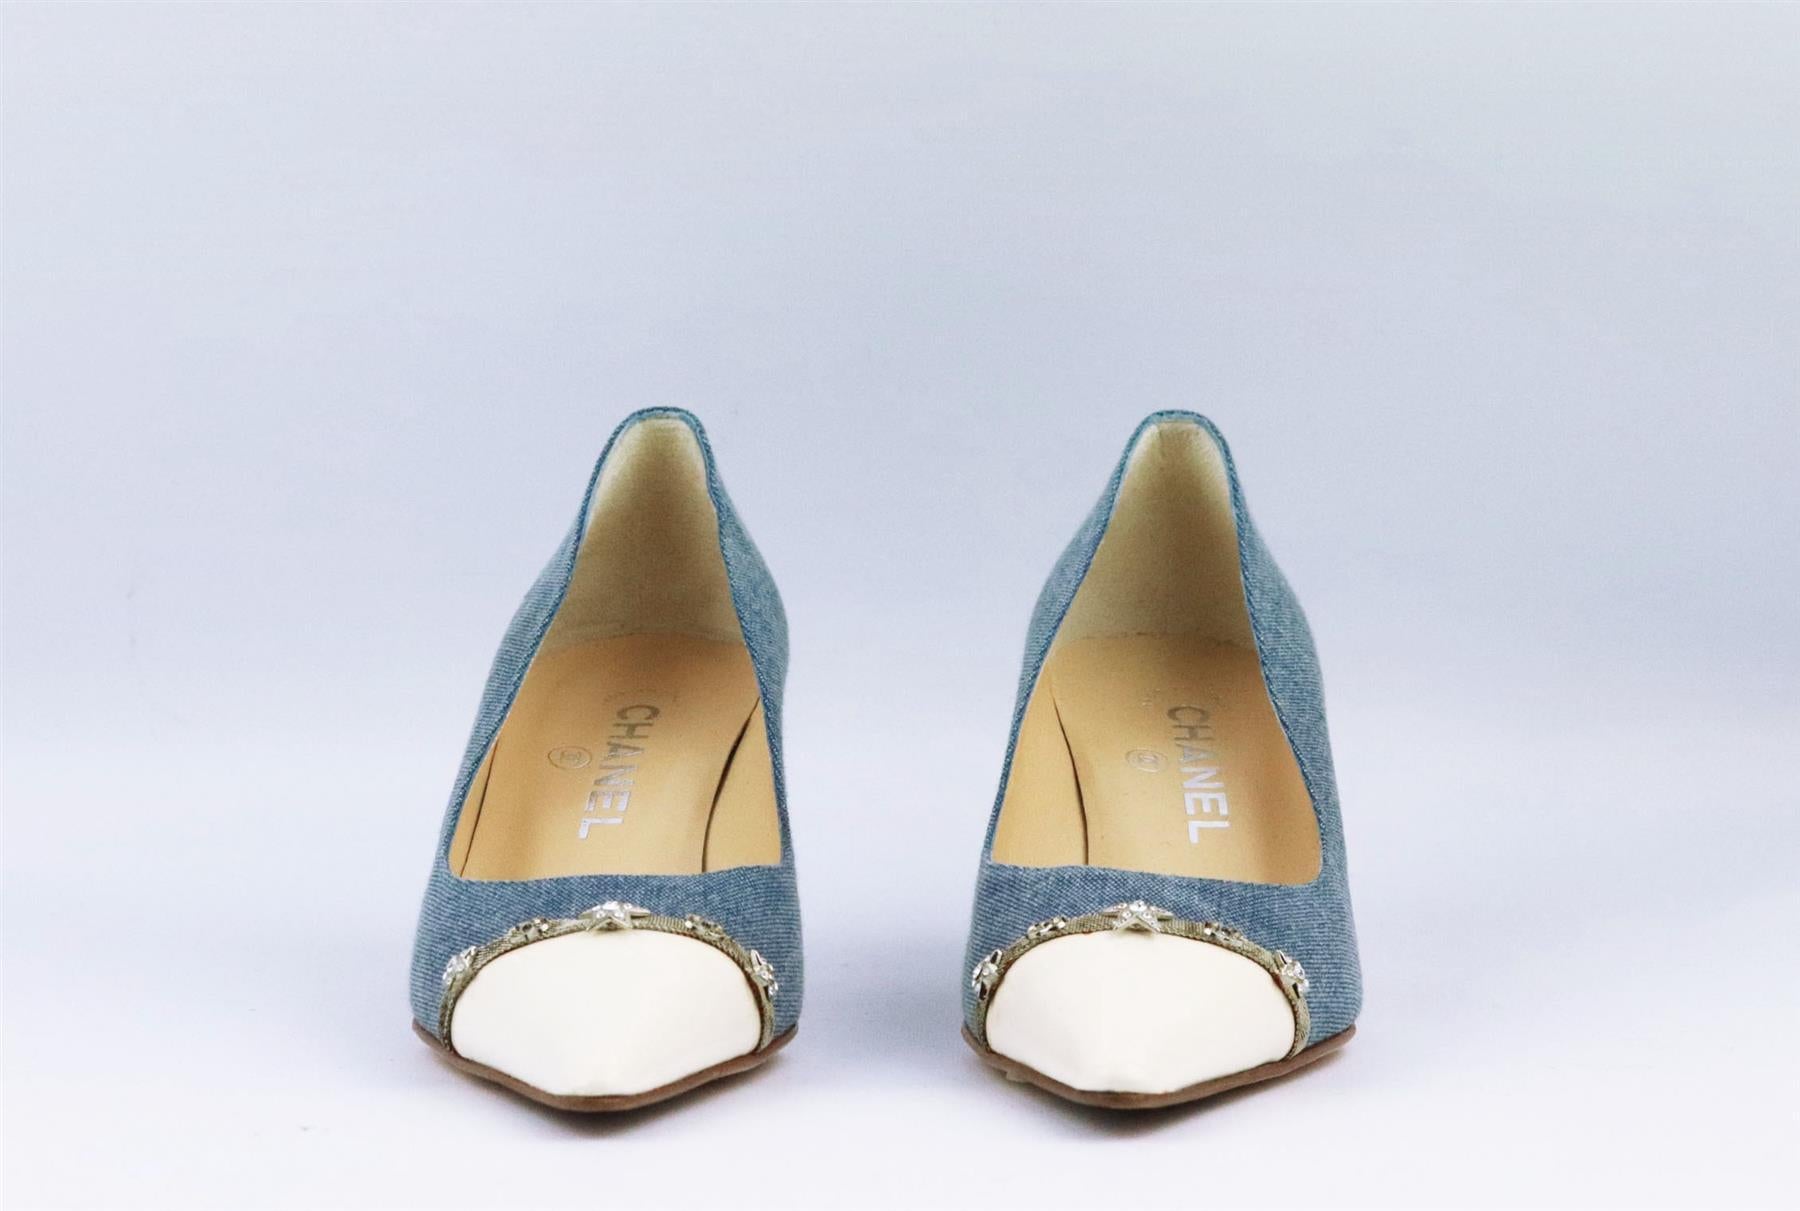 These vintage pumps by Chanel have been made in Italy from blue denim, they're set on a small structured stiletto heel that's balanced with a white leather pointed toe cap and studded with silver tone star and CC on the front. Heel measures